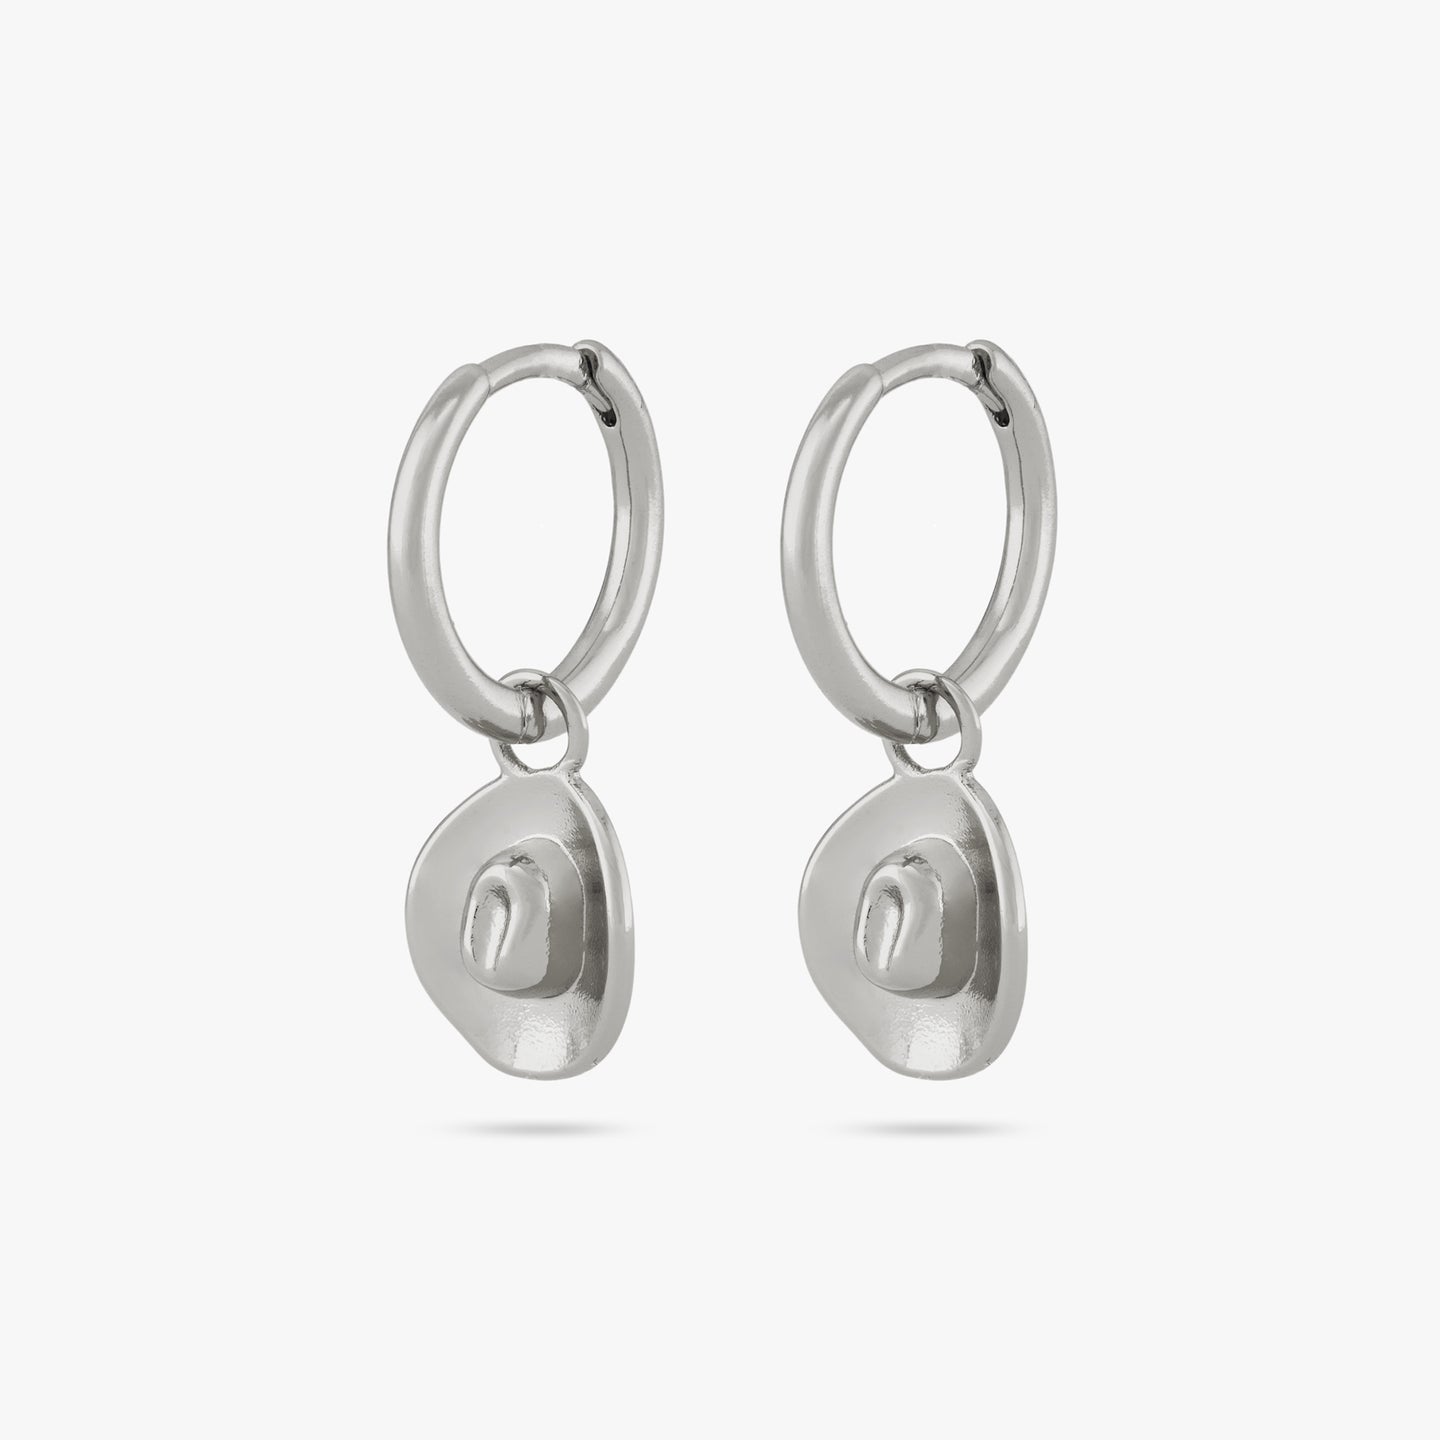 A pair of small silver huggies with a cowboy hat charm [pair] color:null|silver